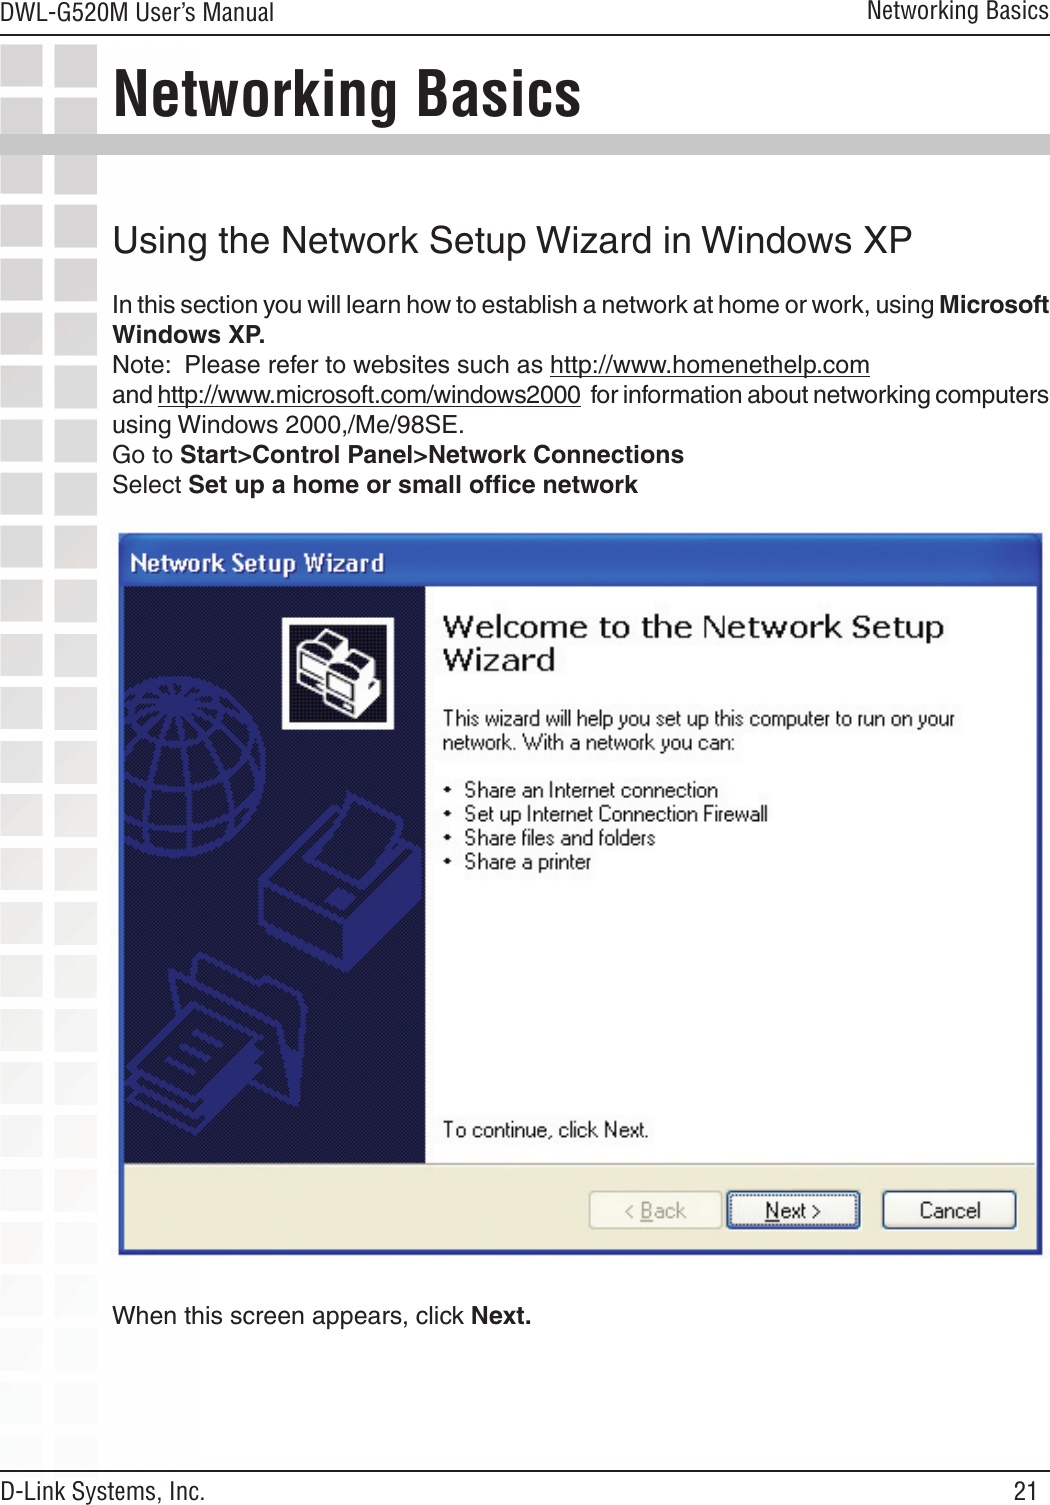 21DWL-G520M User’s ManualD-Link Systems, Inc.Networking BasicsNetworking BasicsUsing the Network Setup Wizard in Windows XPIn this section you will learn how to establish a network at home or work, using Microsoft Windows XP.  Note:  Please refer to websites such as http://www.homenethelp.comand http://www.microsoft.com/windows2000  for information about networking computers using Windows 2000,/Me/98SE.Go to Start&gt;Control Panel&gt;Network ConnectionsSelect Set up a home or small ofﬁce networkWhen this screen appears, click Next.